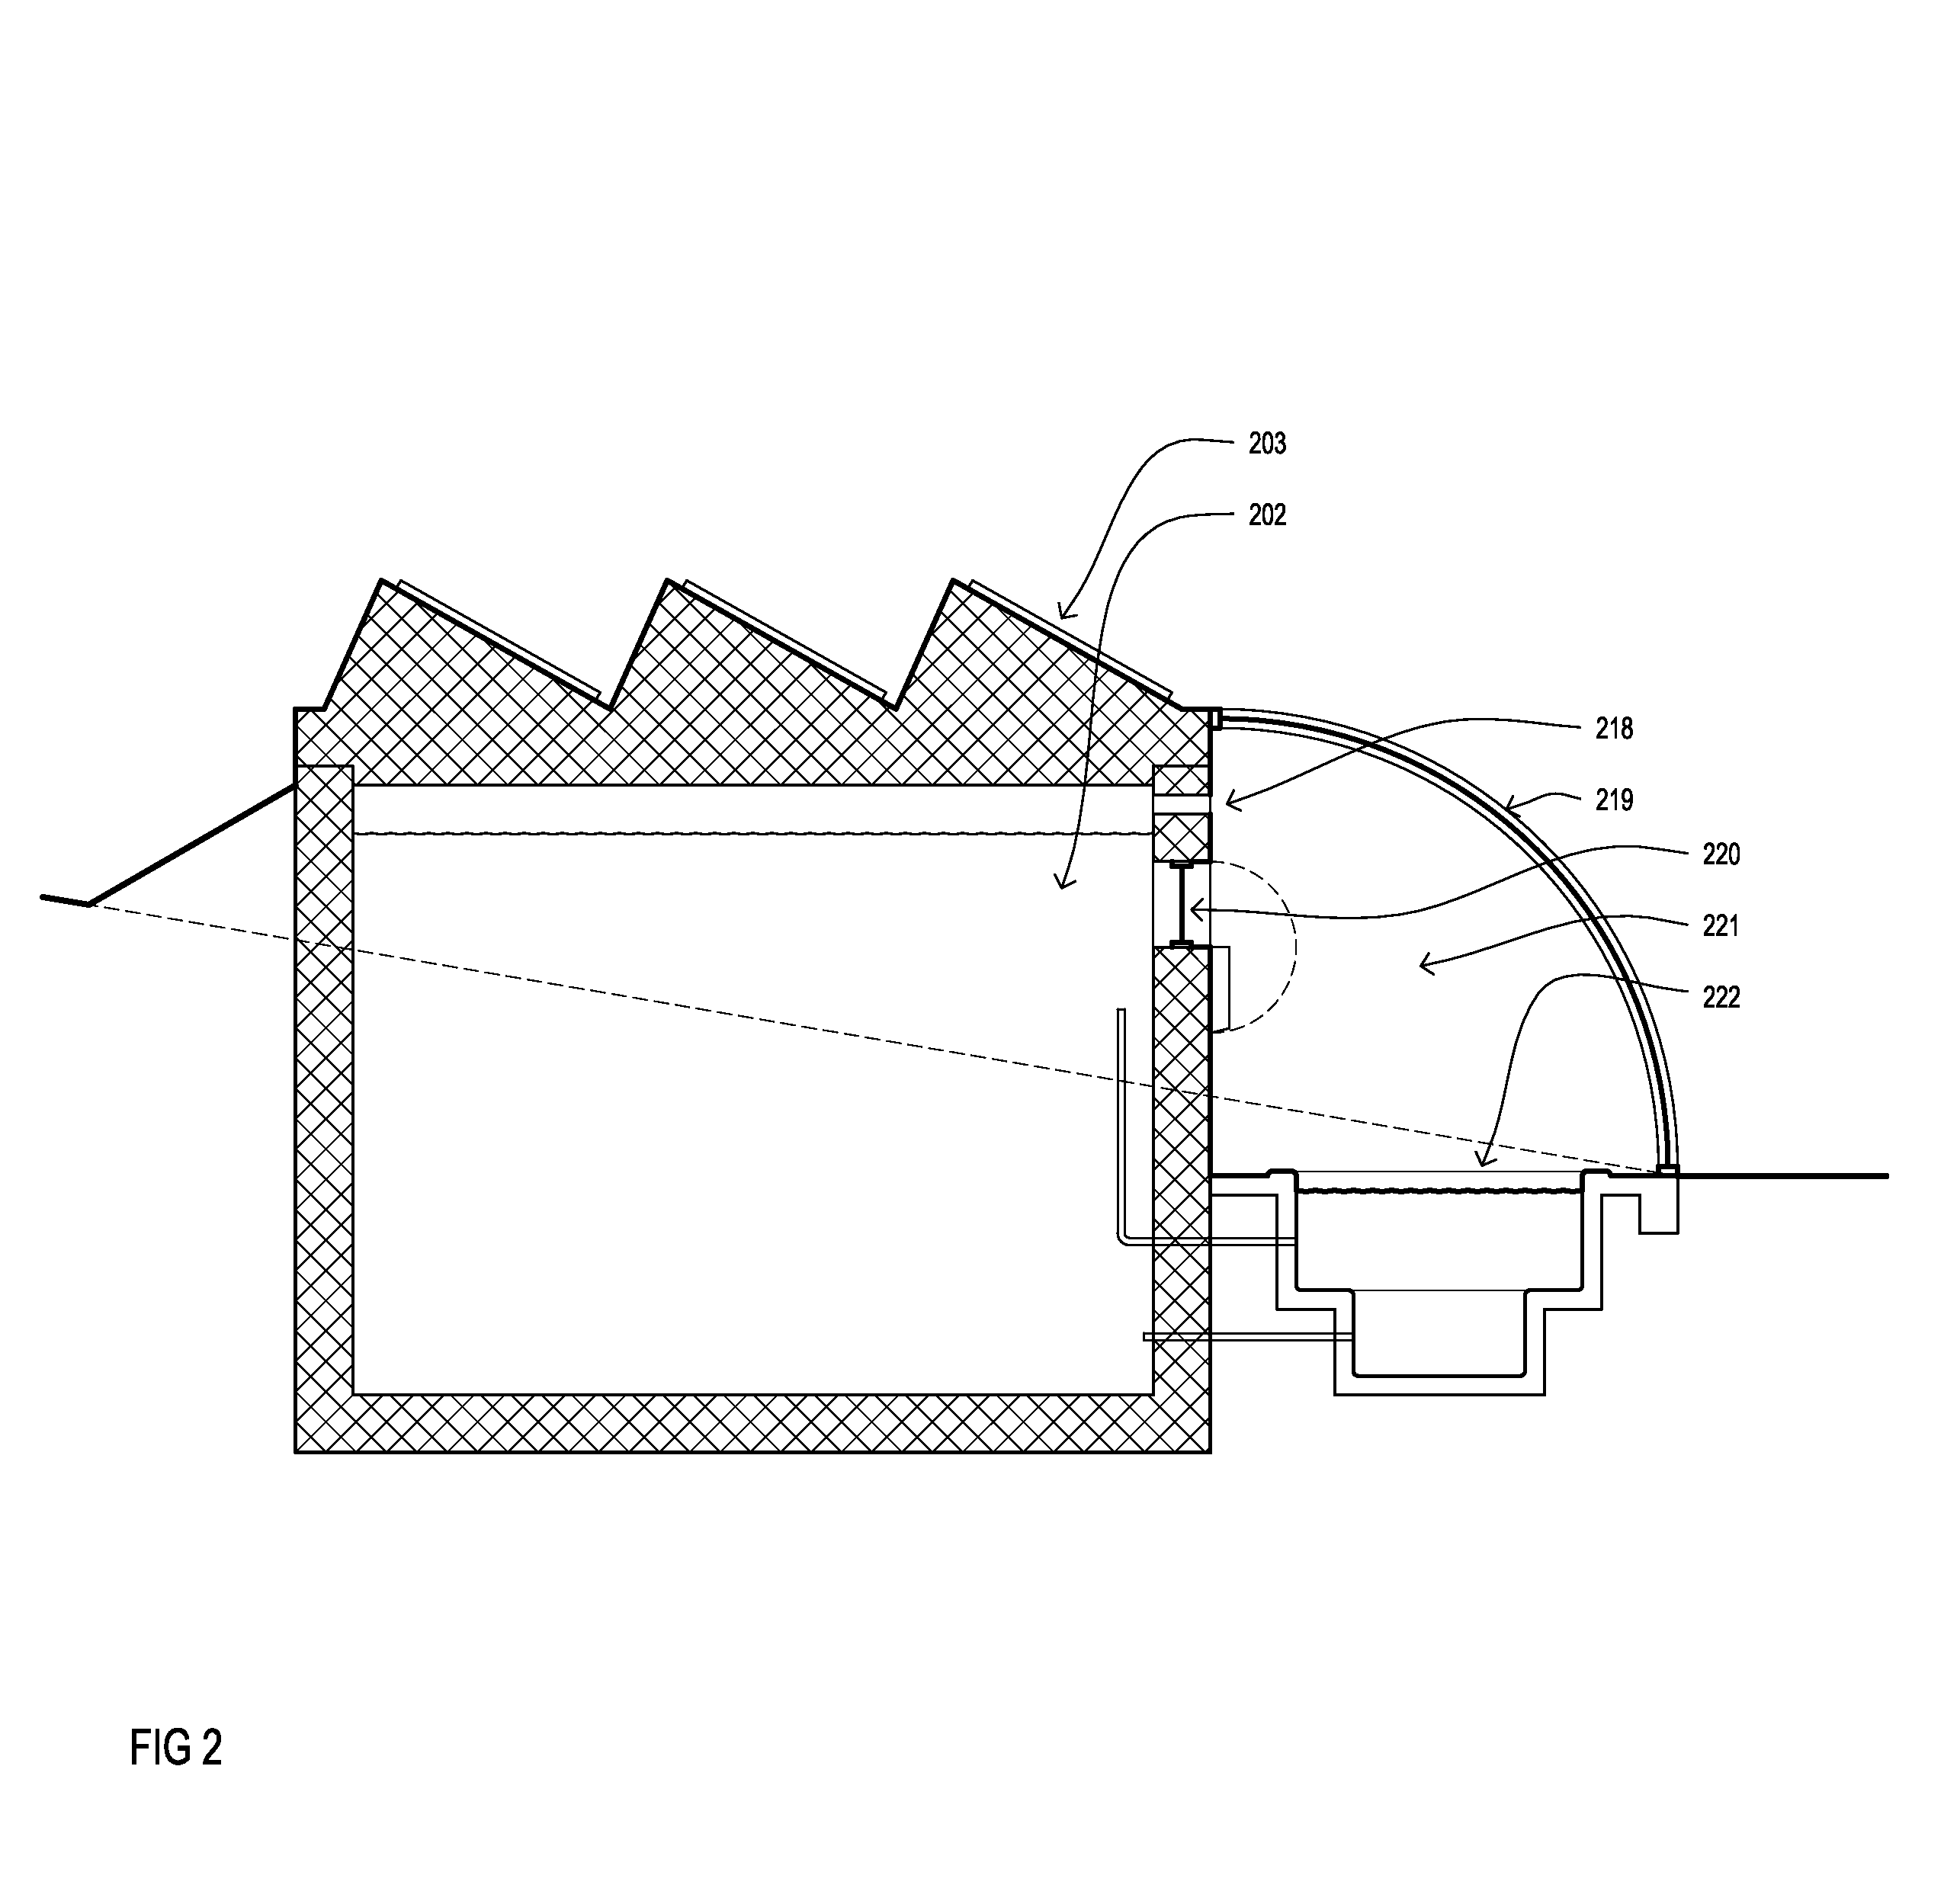 Methods and apparatus for creating large energy storage mass through the collection and use of warmed water